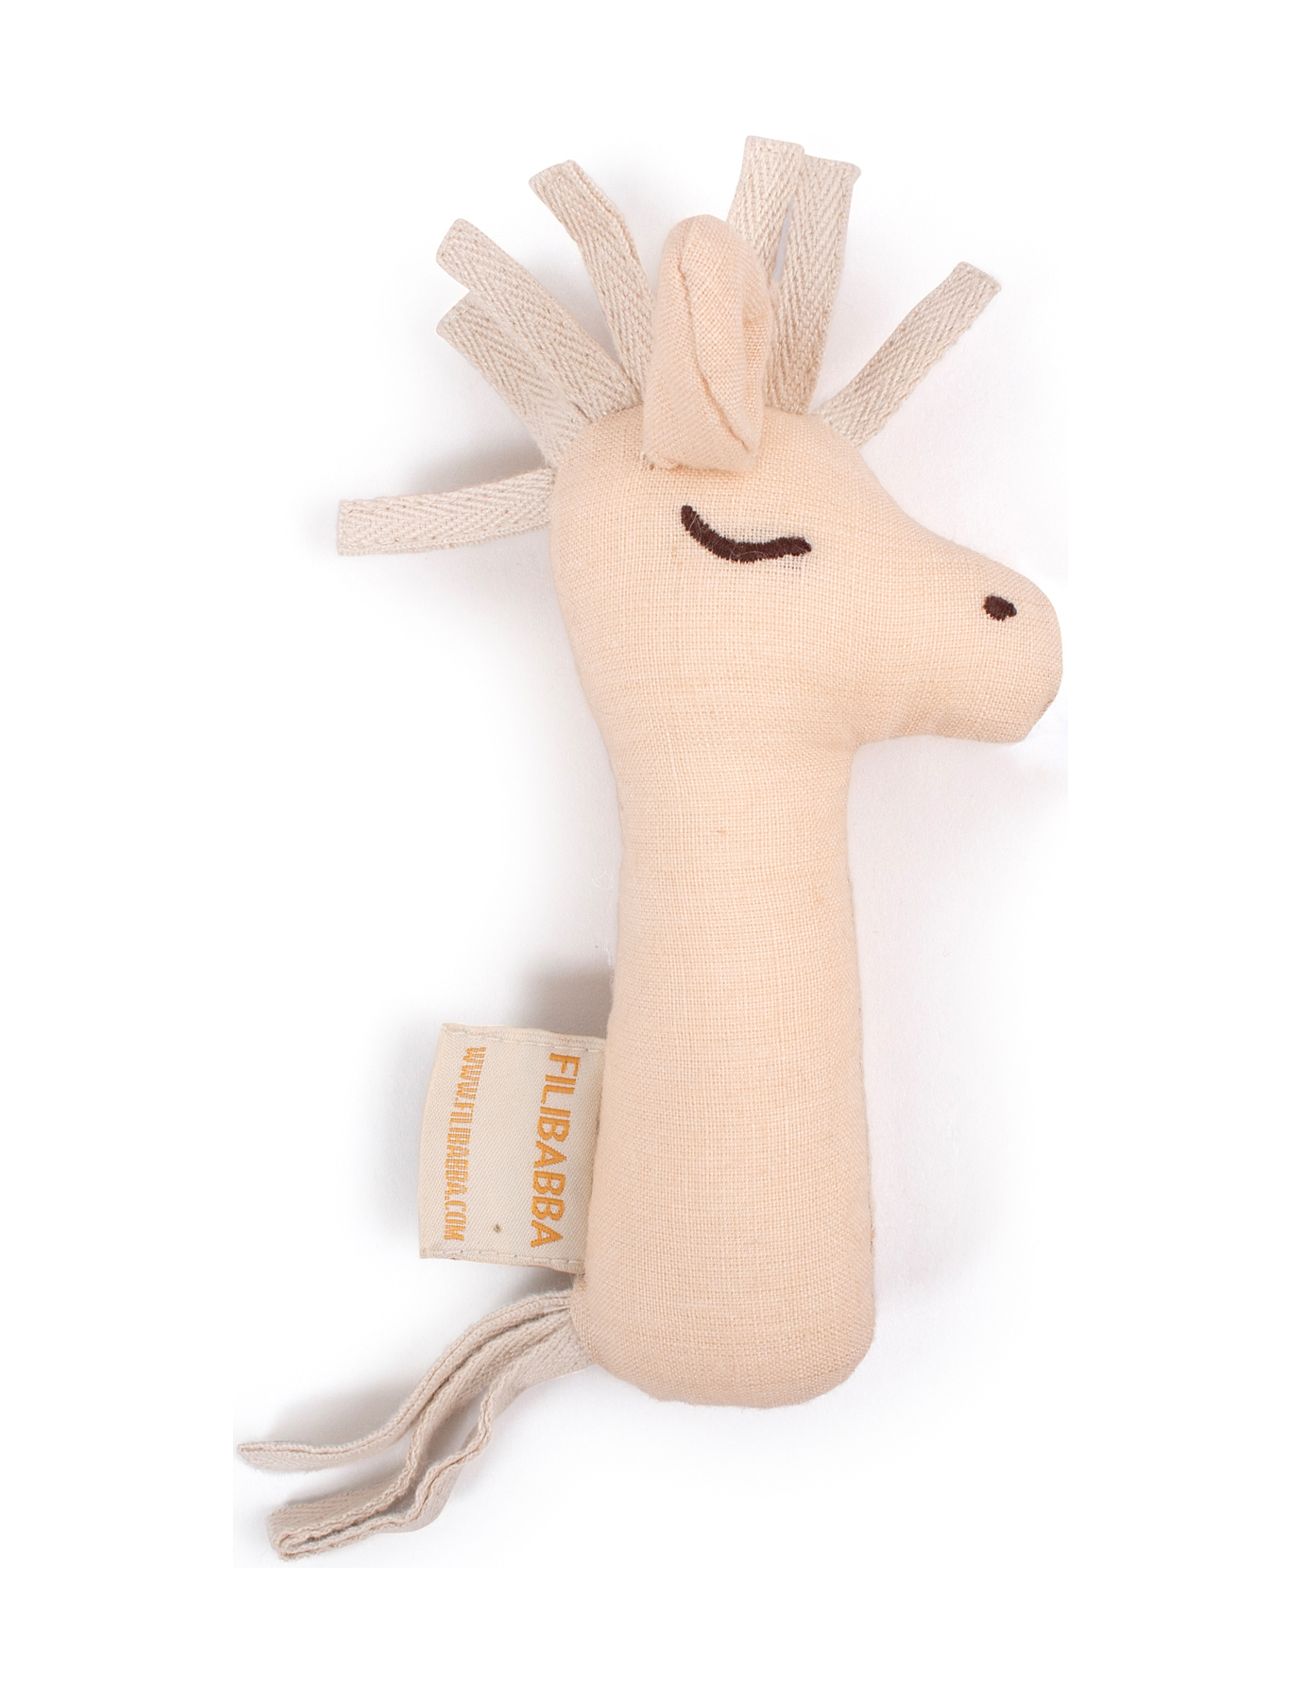 Linen Rattle - Horse Toys Baby Toys Rattles Multi/patterned Filibabba